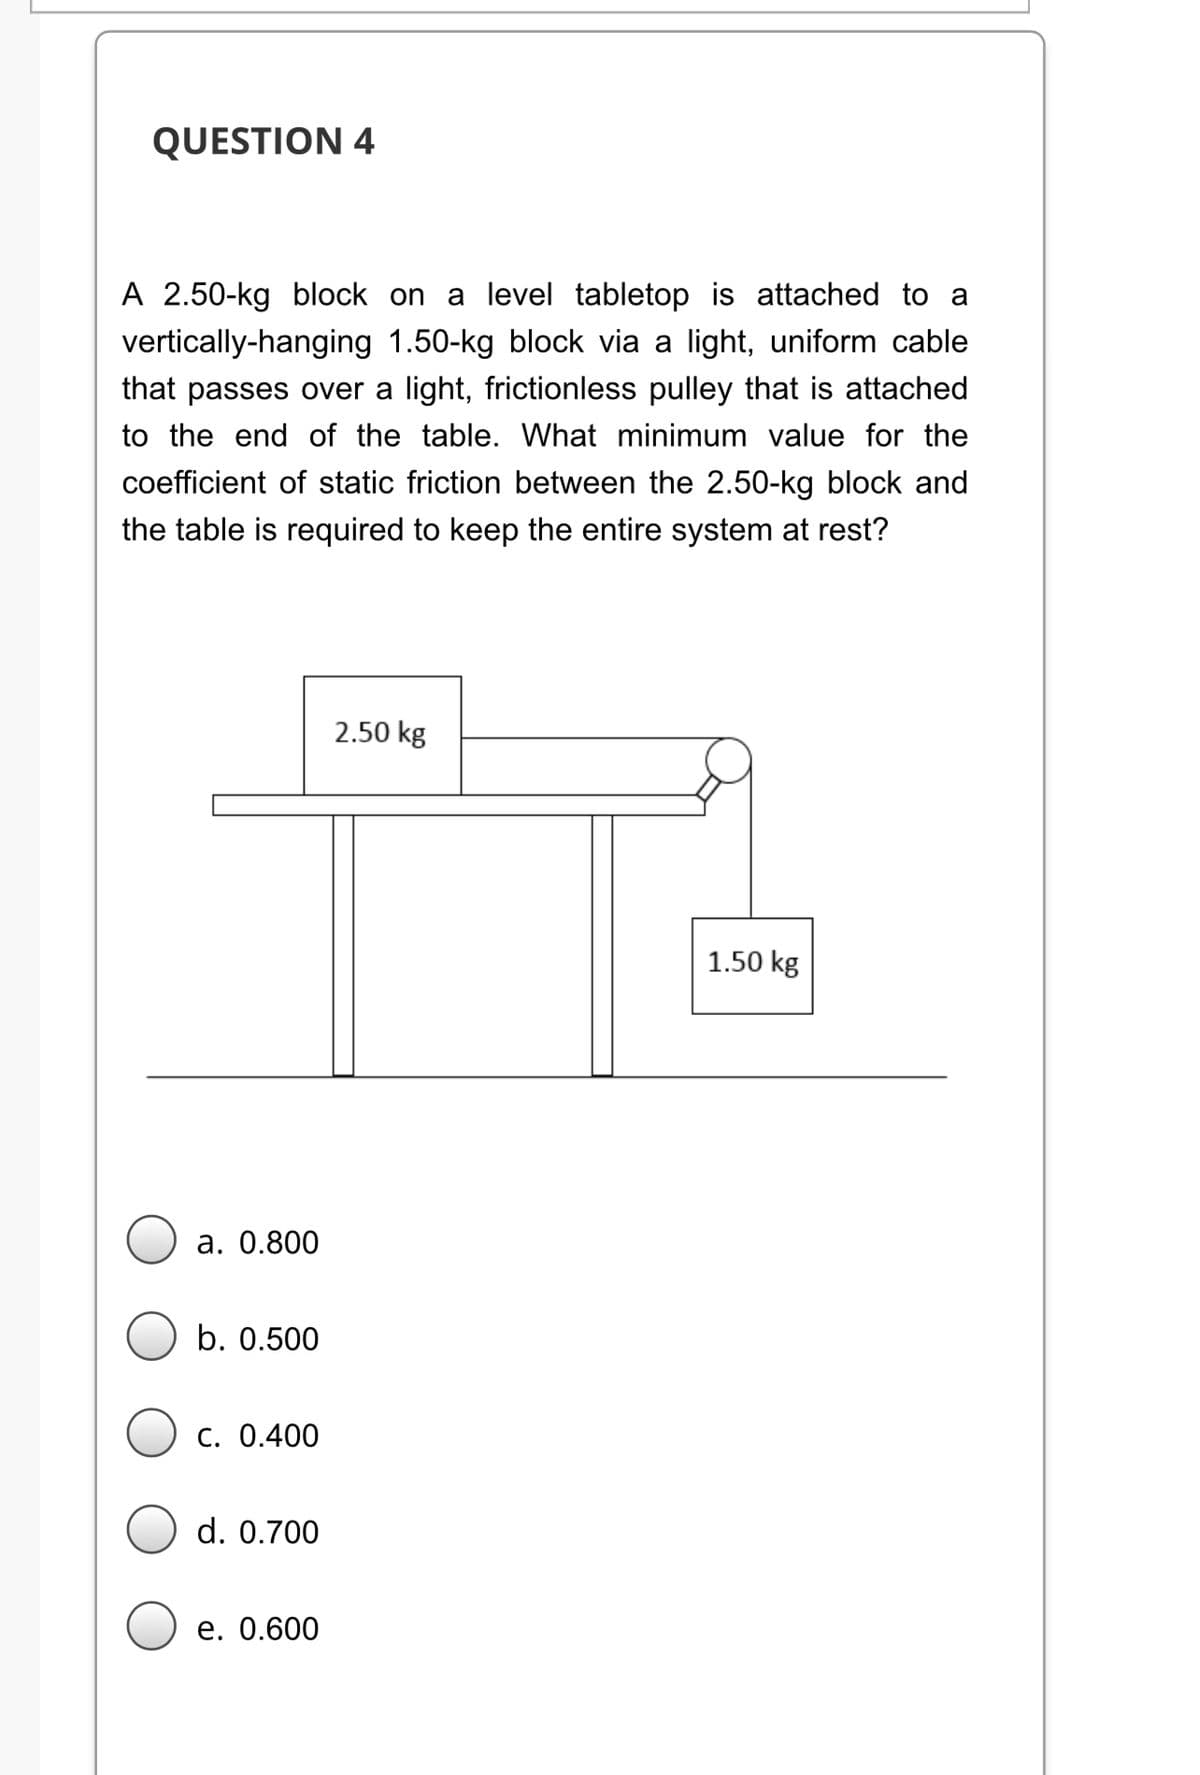 QUESTION 4
A 2.50-kg block on a level tabletop is attached to a
vertically-hanging 1.50-kg block via a light, uniform cable
that passes over a light, frictionless pulley that is attached
to the end of the table. What minimum value for the
coefficient of static friction between the 2.50-kg block and
the table is required to keep the entire system at rest?
2.50 kg
1.50 kg
a. 0.800
b. 0.500
C. 0.400
d. 0.700
e. 0.600
